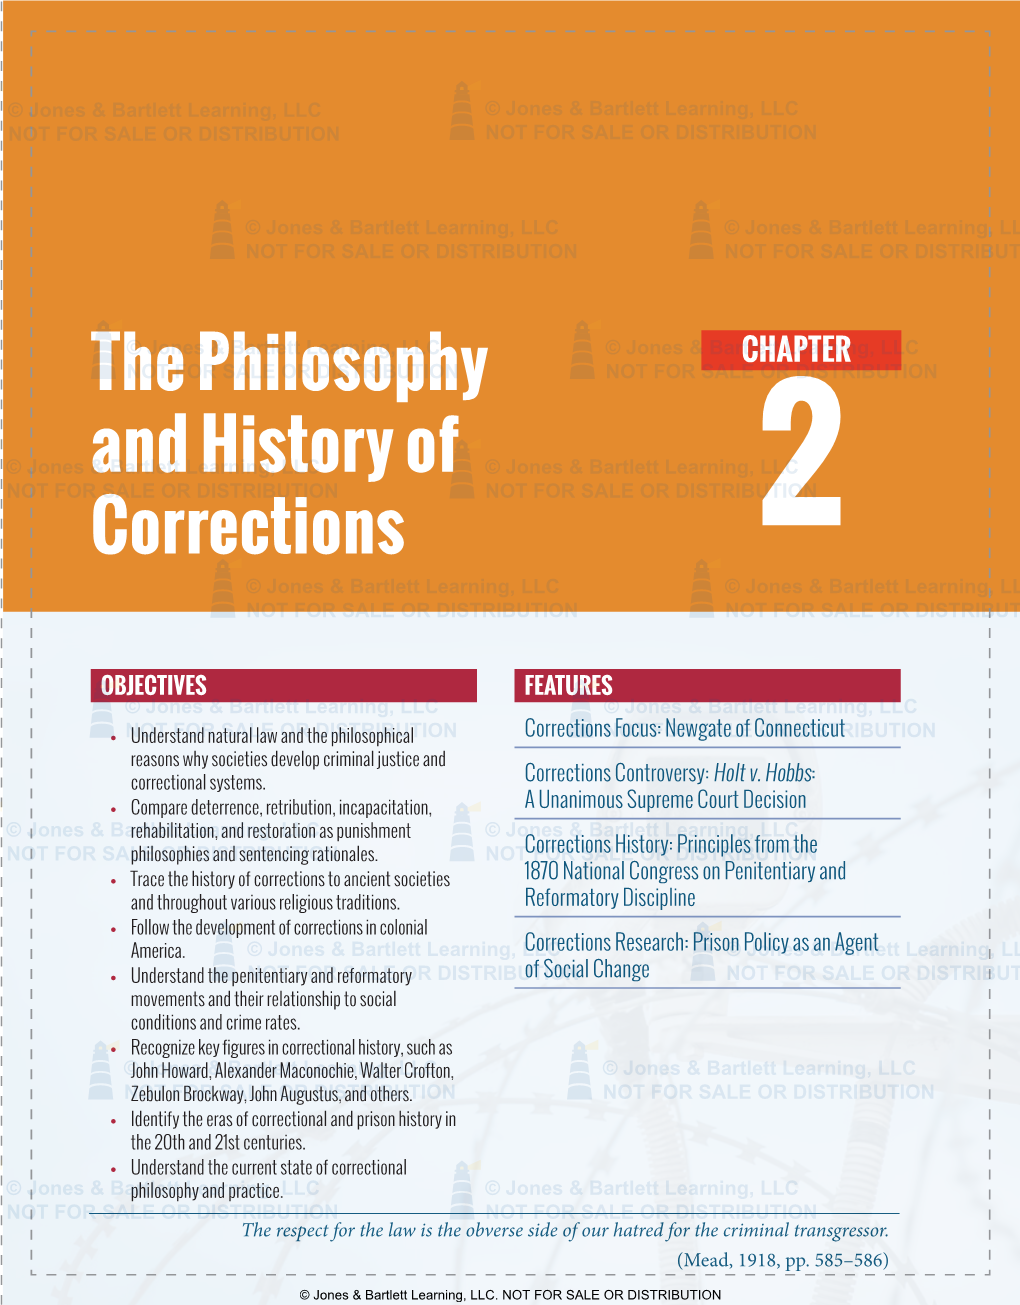 The Philosophy and History of Corrections